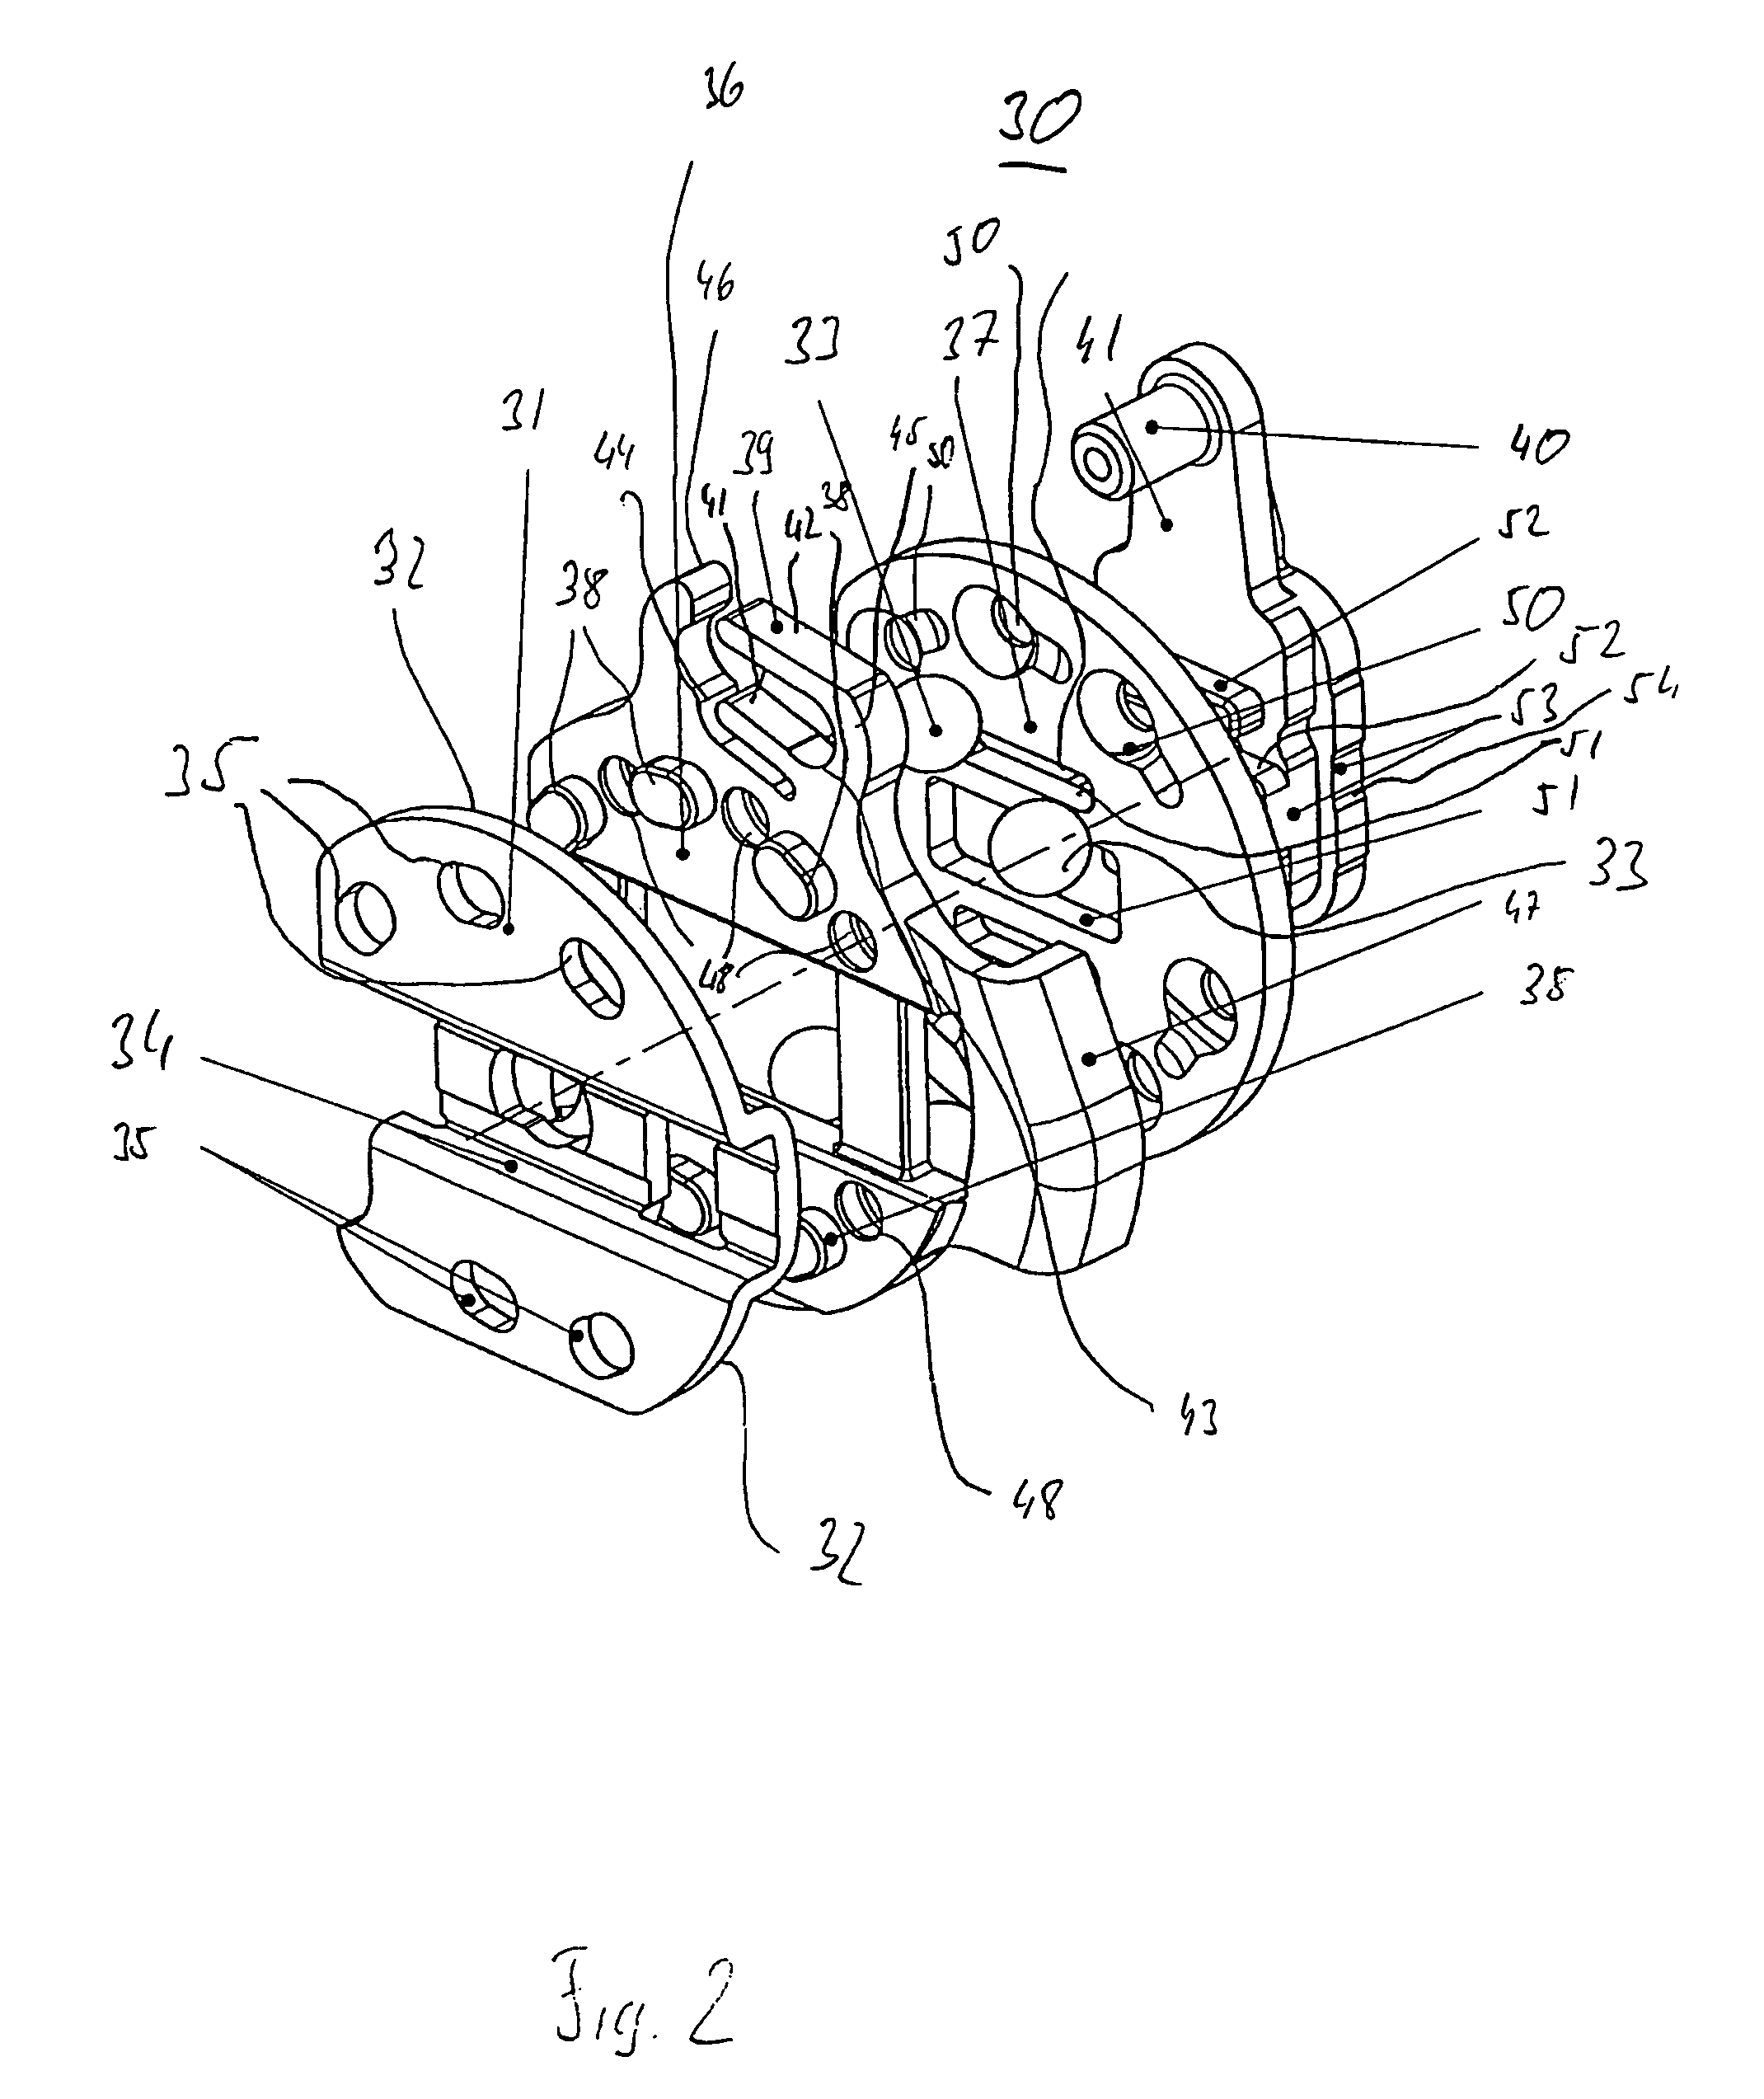 Clamping device for a steering column